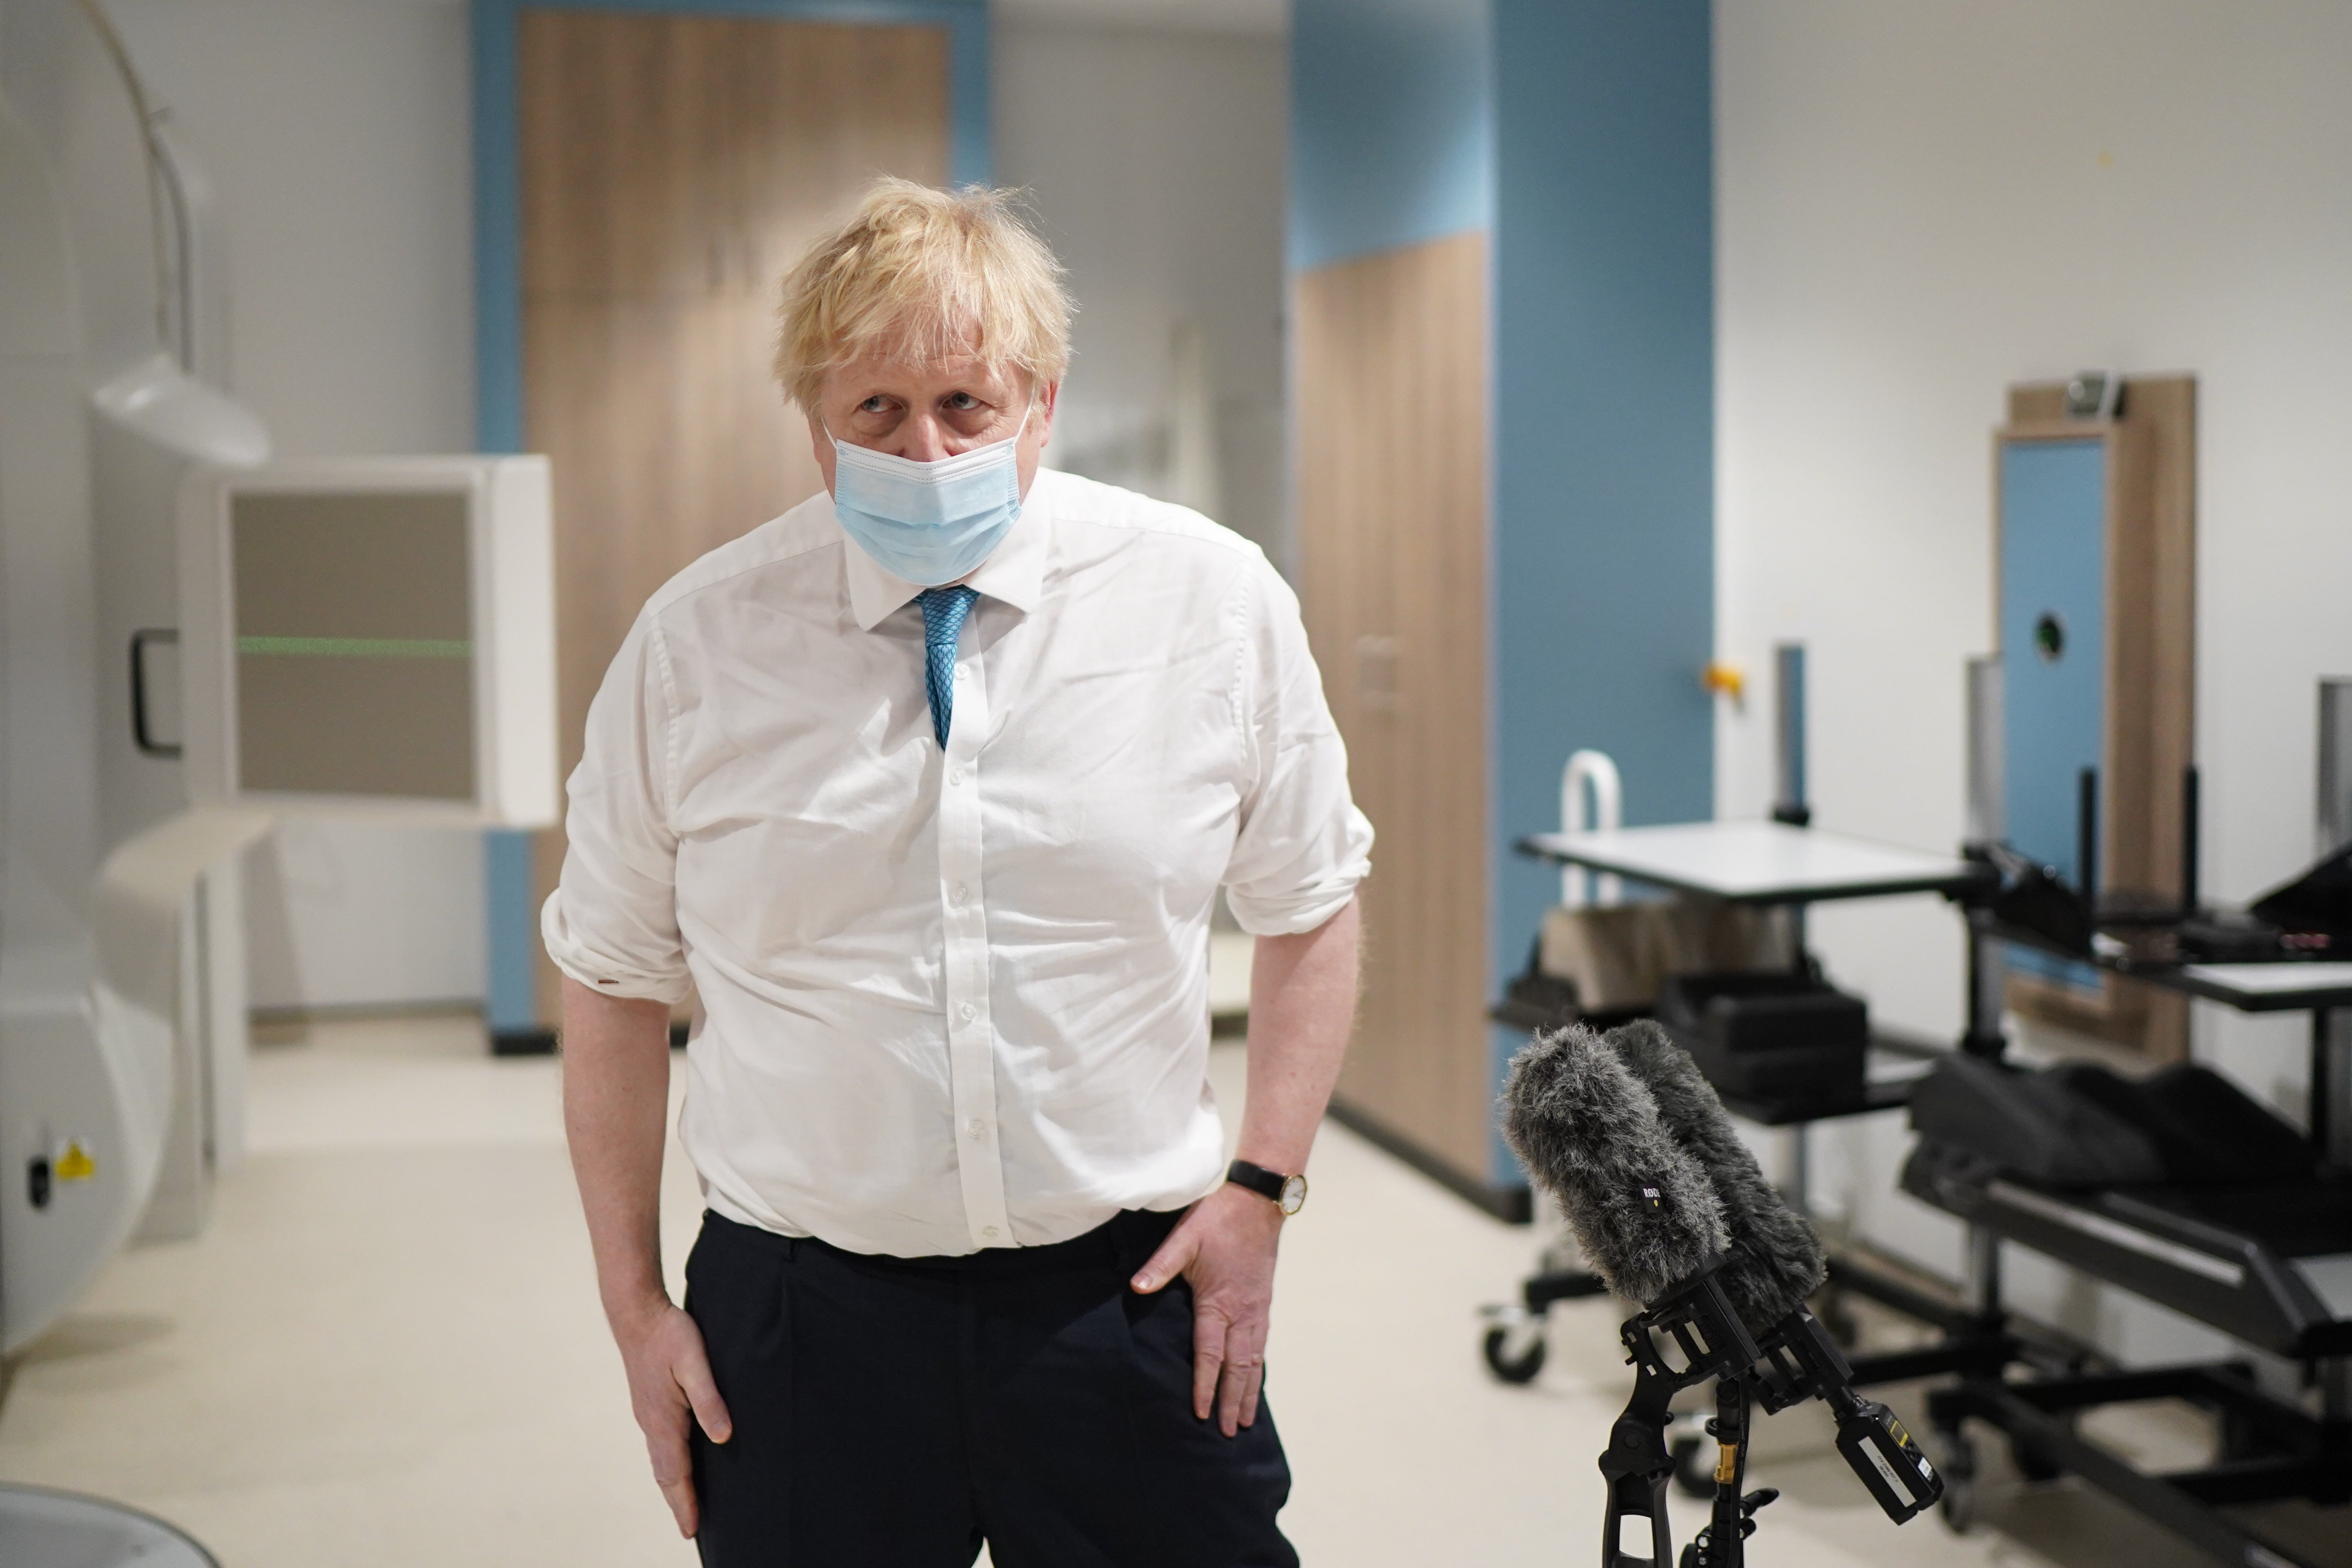 Prime Minister Boris Johnson during a visit to the Kent Oncology Centre at Maidstone Hospital in Kent (Gareth Fuller/PA)